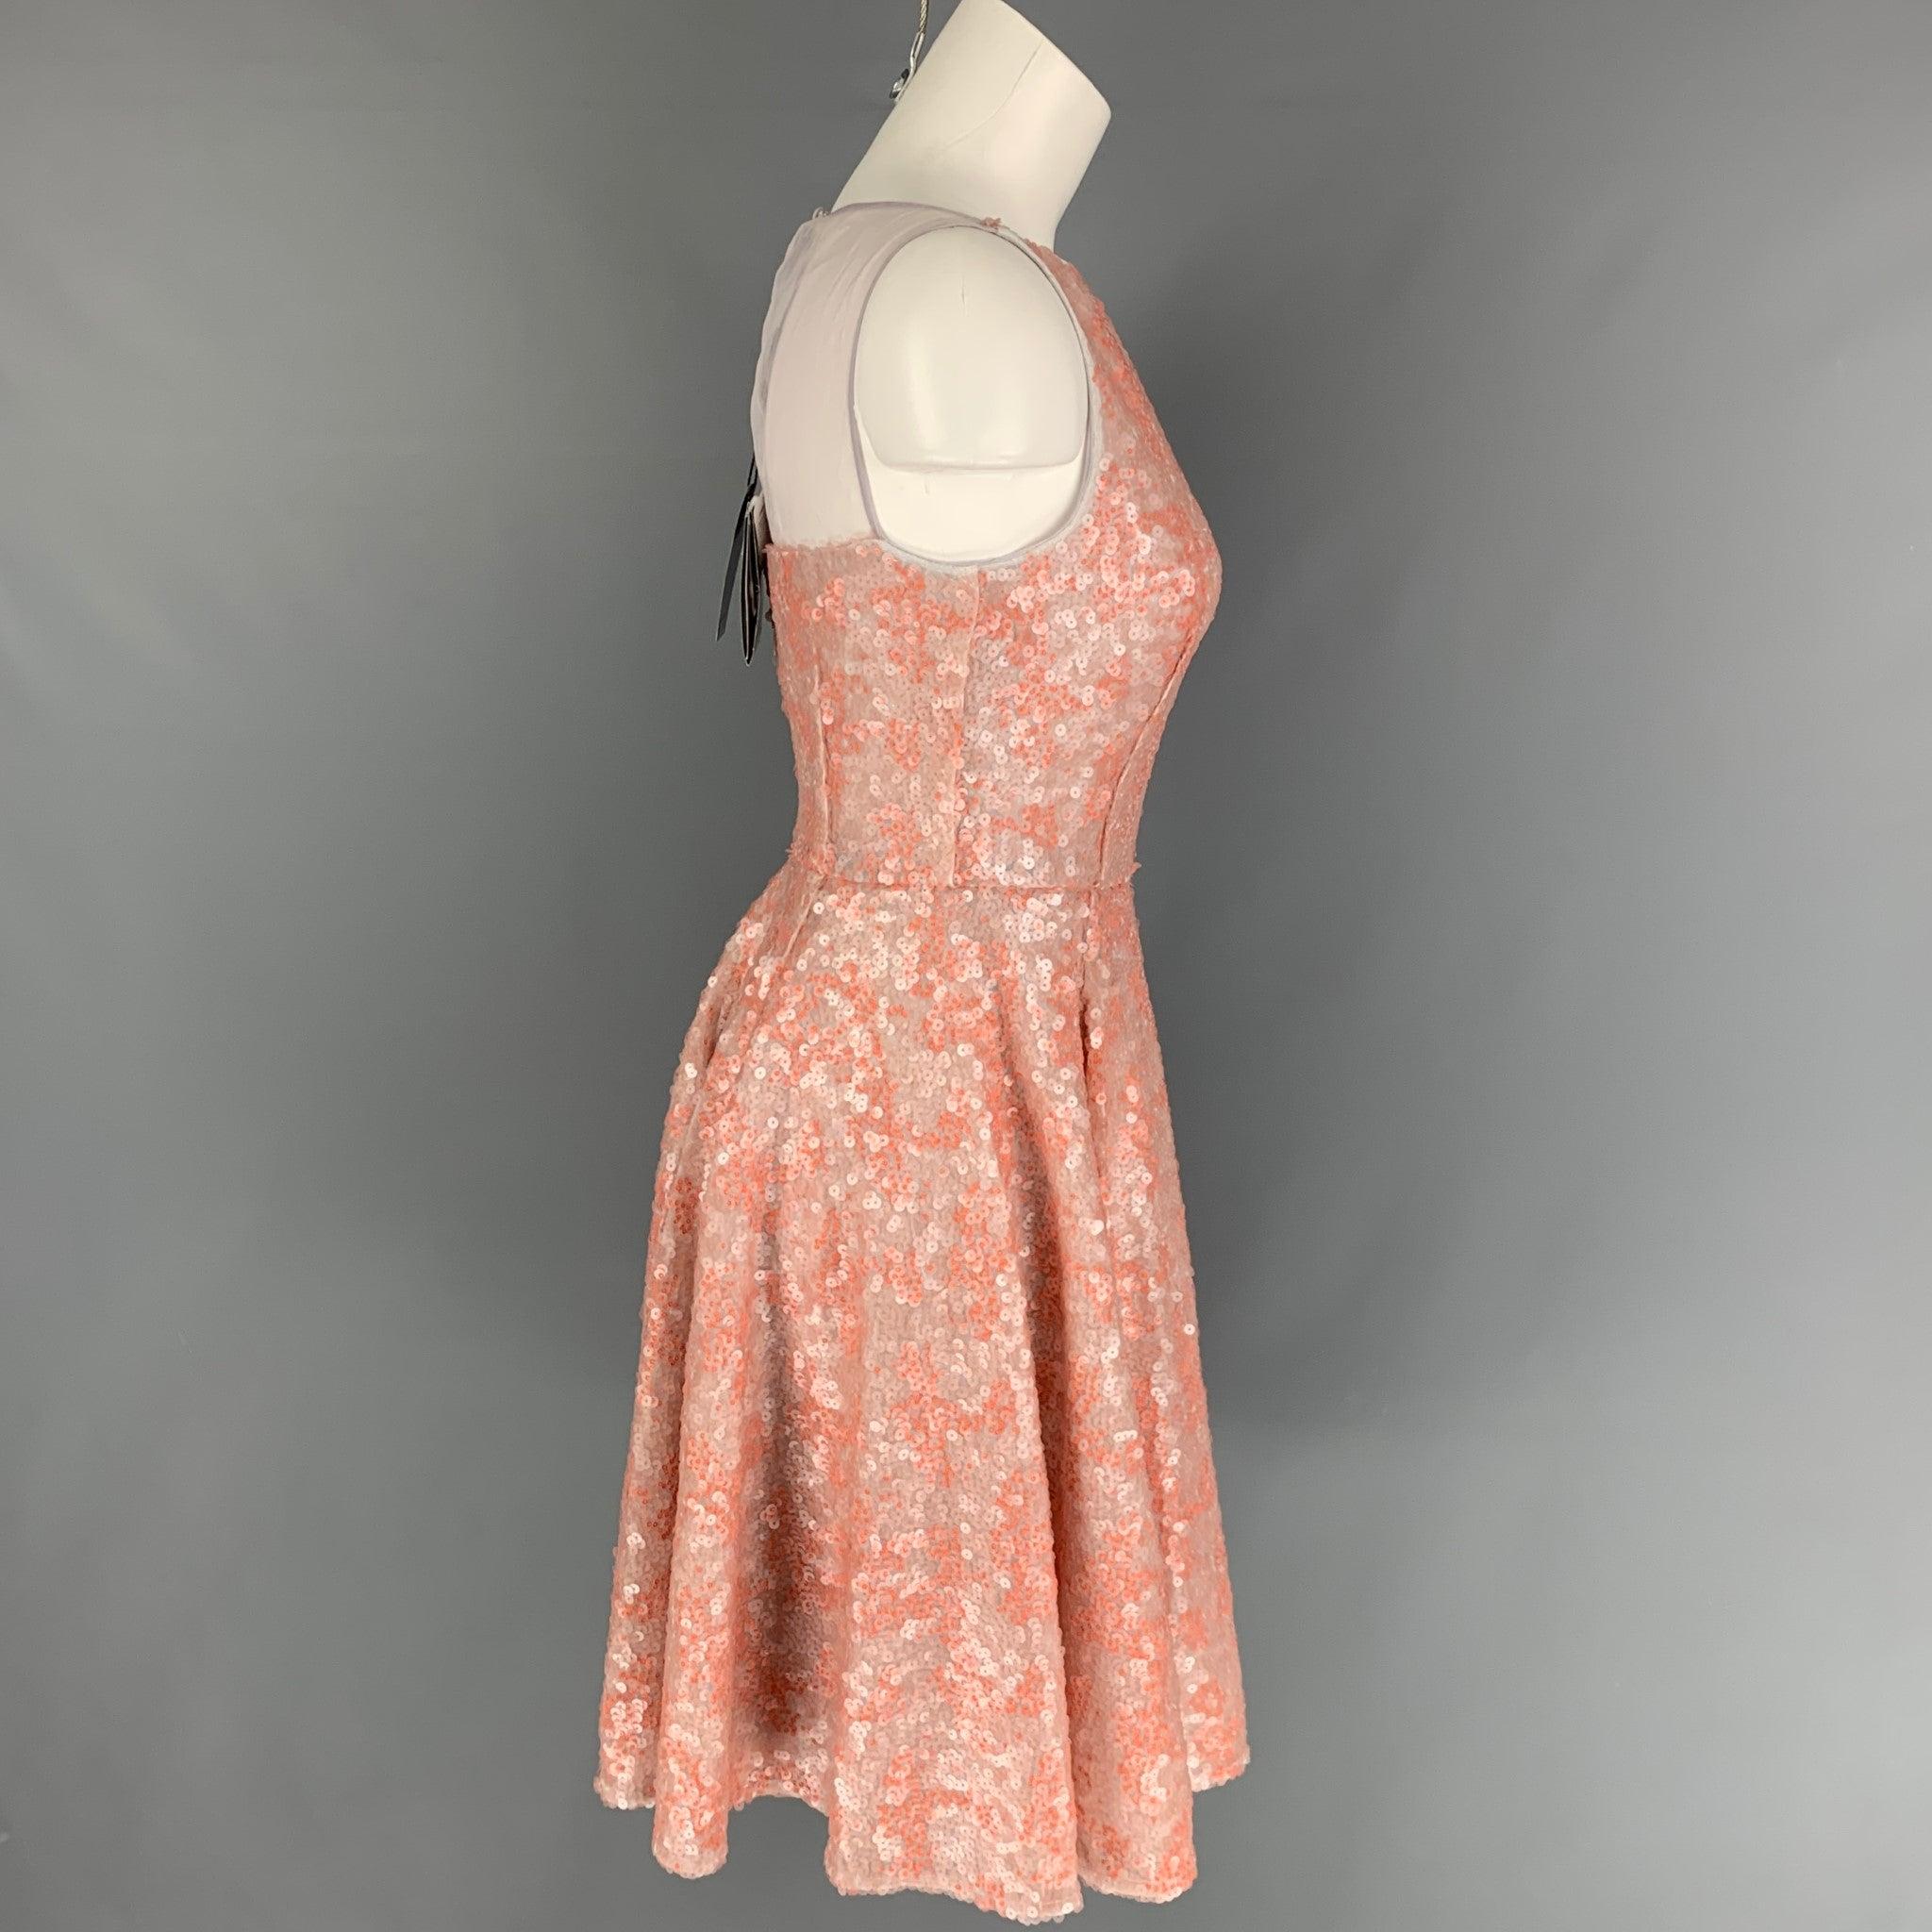 EMPORIO ARMANI dress comes in a orange sequin polyester with a slip liner featuring an a-line style, lae back panel, sleeveless, and a back zip up closure.
New With Tags.
 

Marked:   36 

Measurements: 
 
Shoulder: 13 inches  Bust: 26 inches 